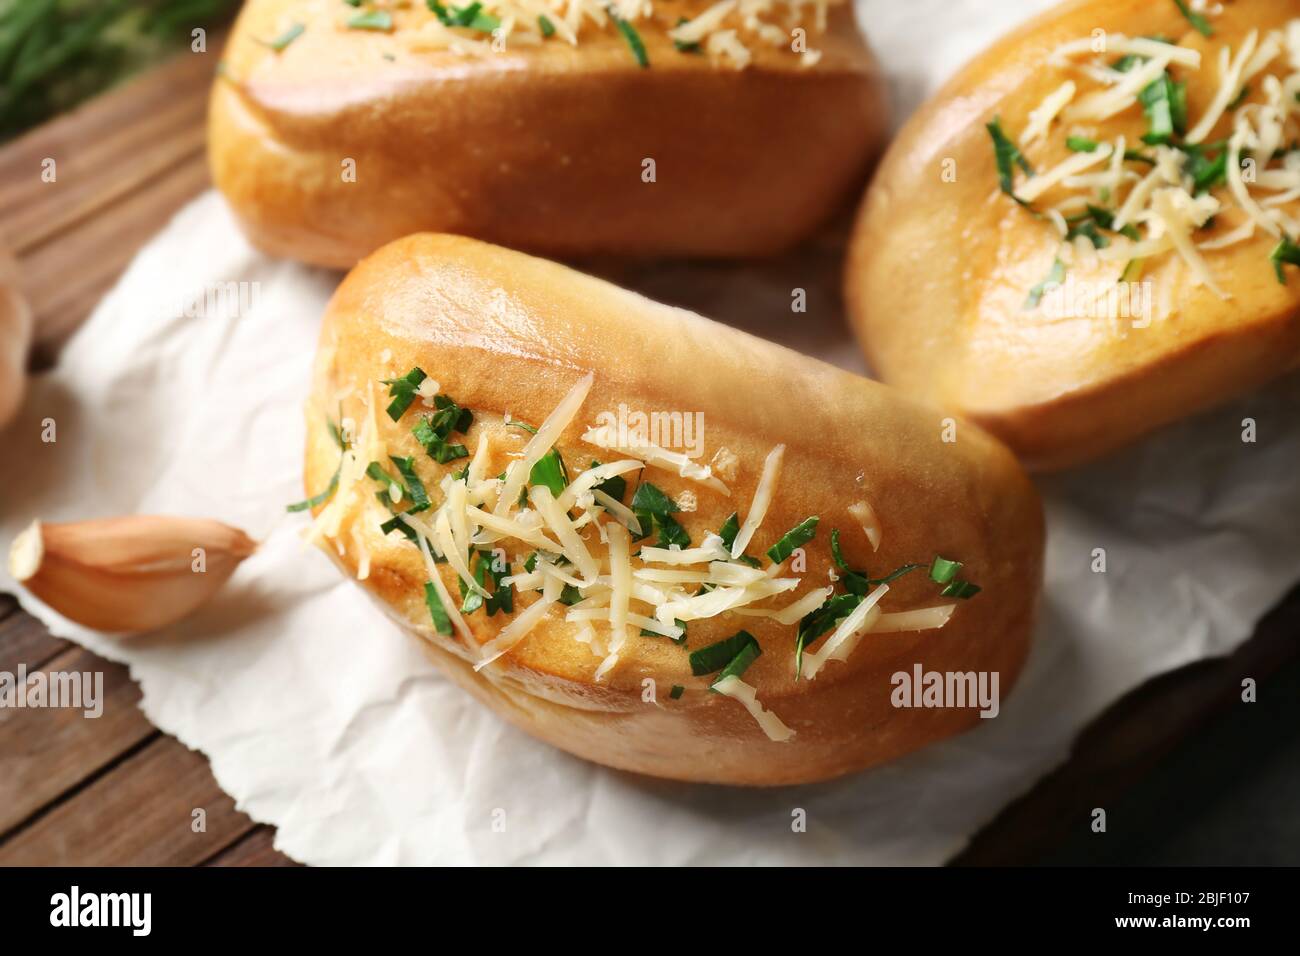 Tasty buns with garlic, cheese and herbs on paper Stock Photo